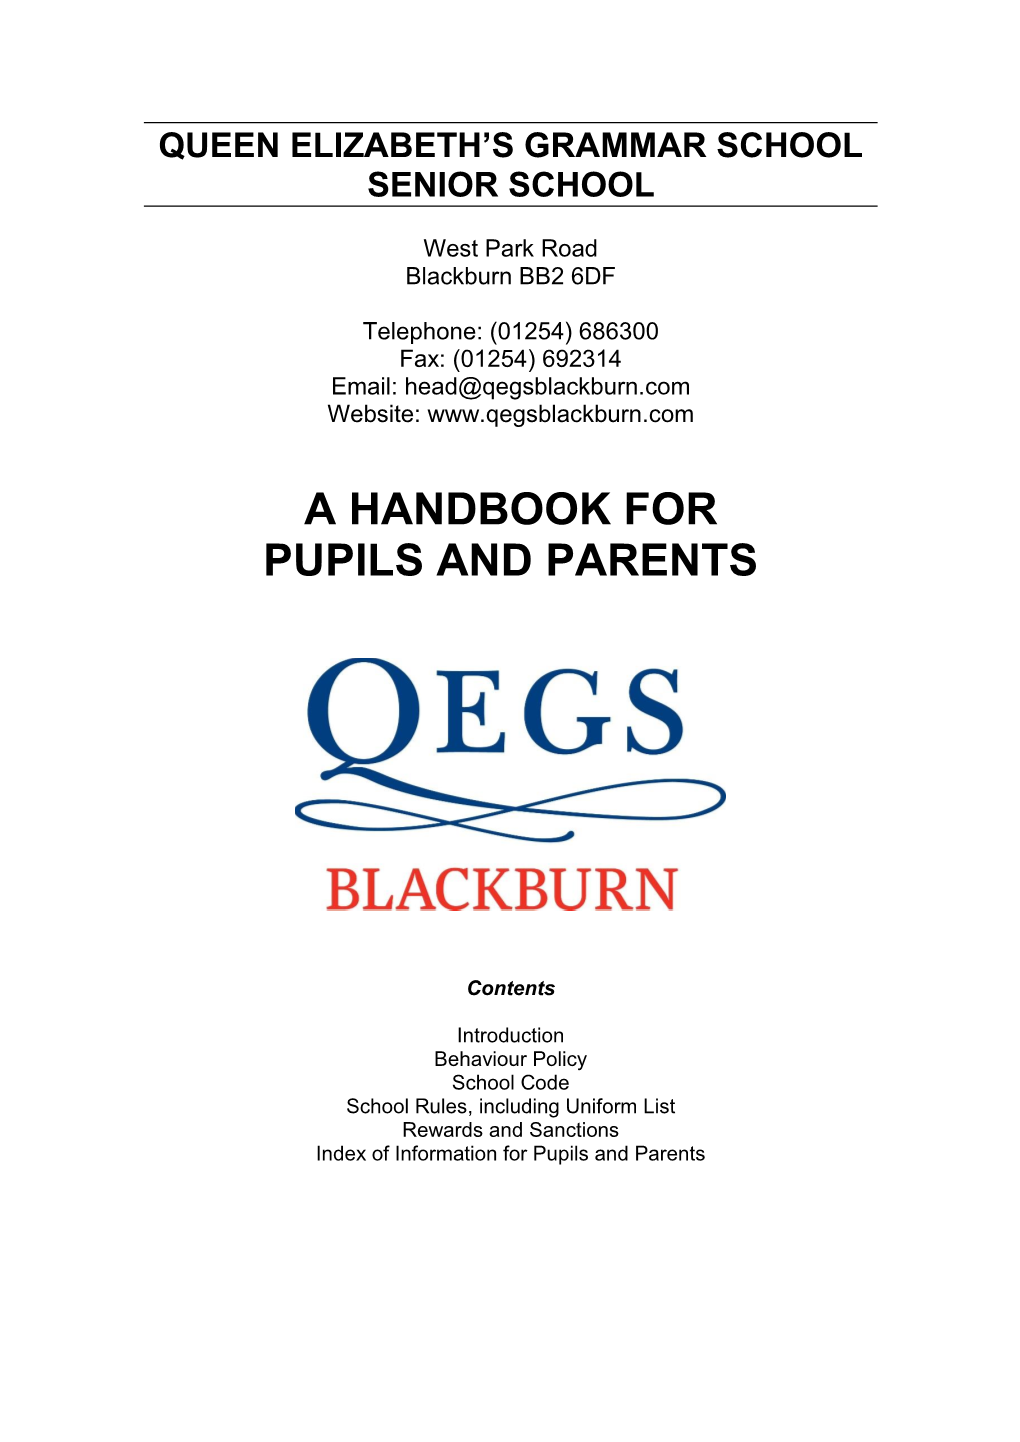 A Handbook for Pupils and Parents